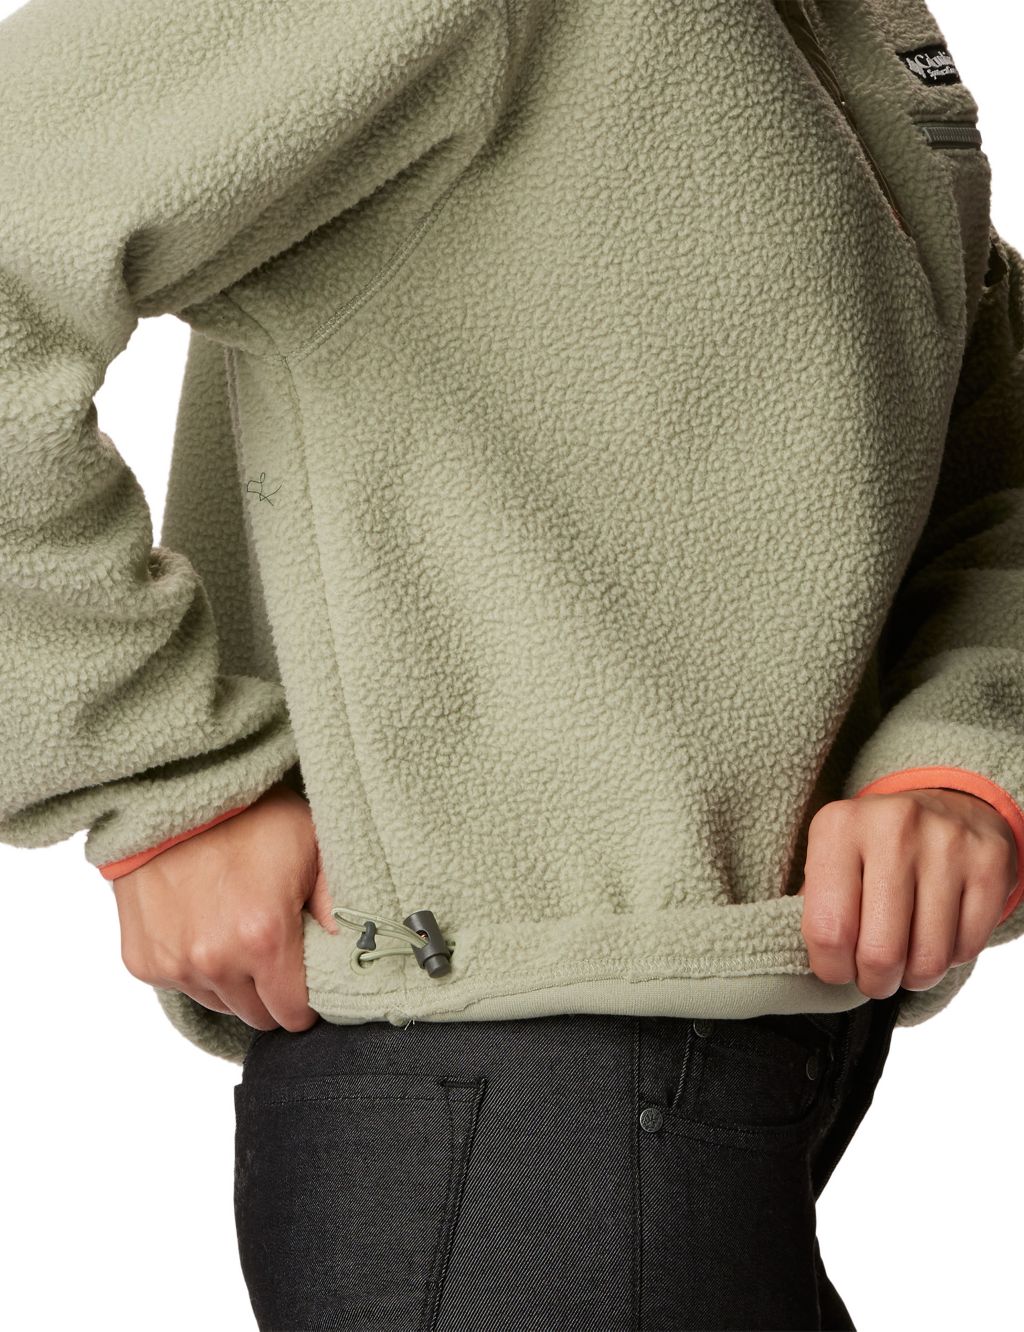 Helvetia Funnel Neck Cropped Jacket image 5